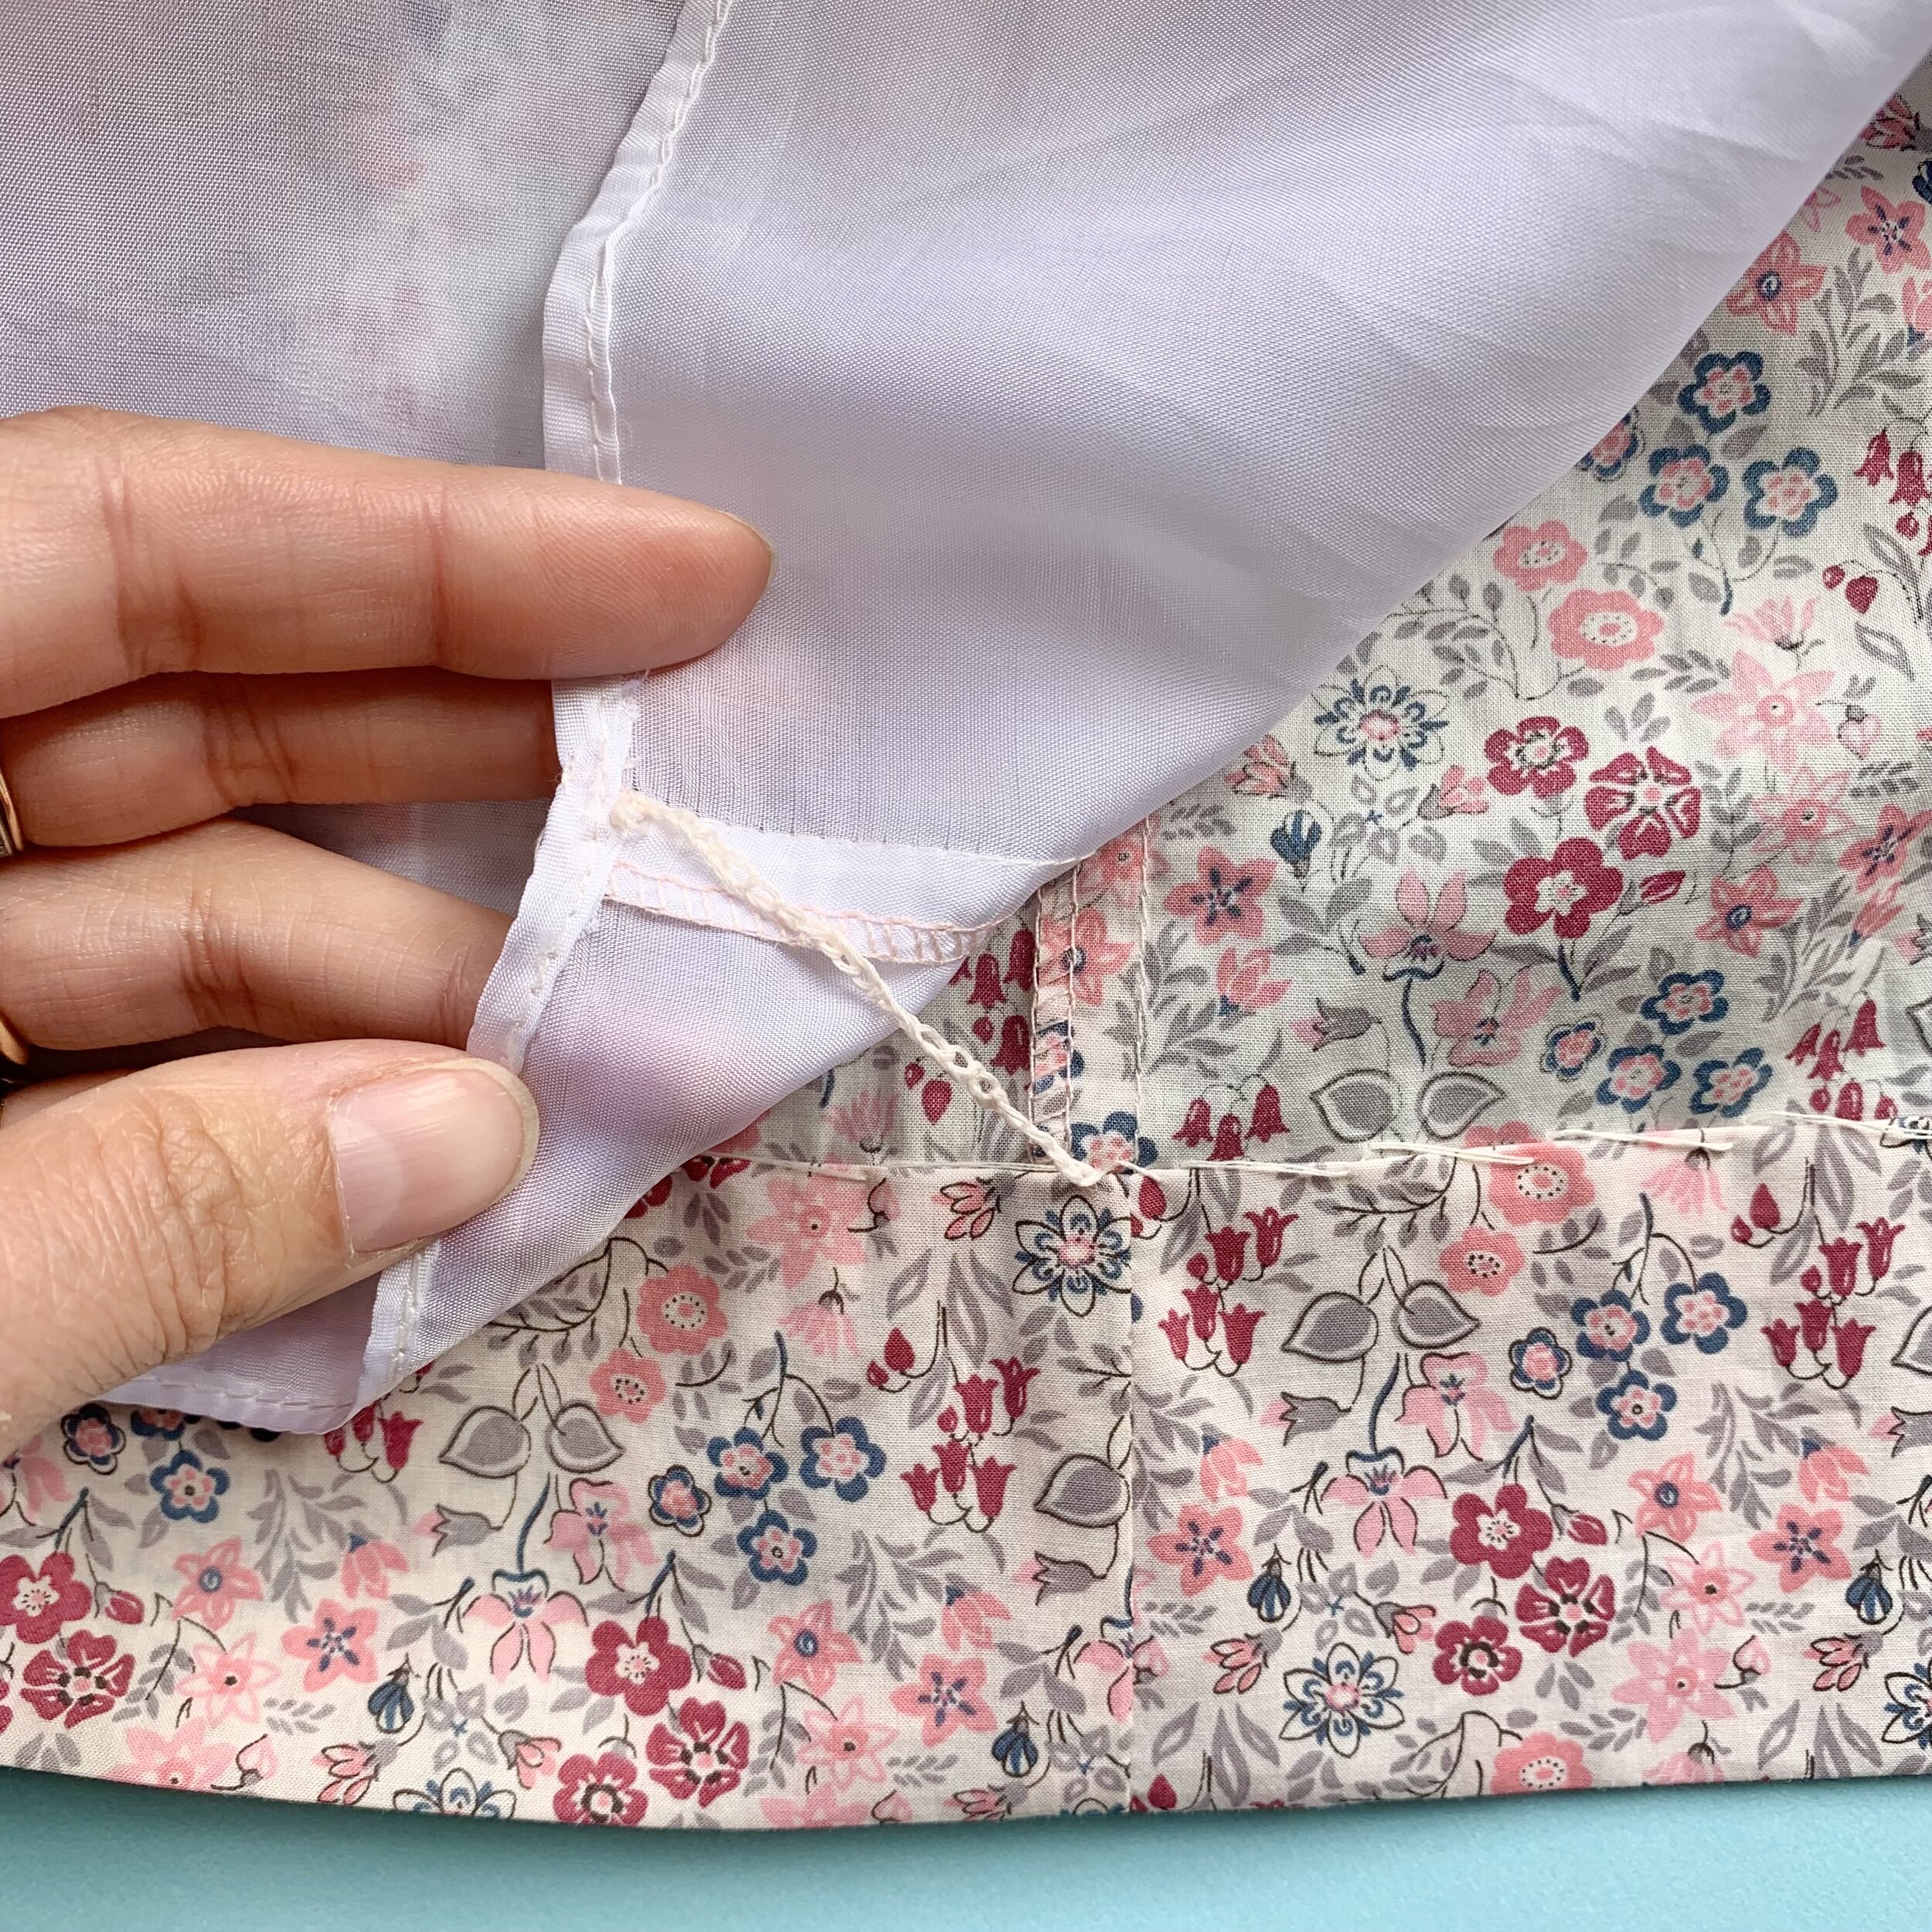 How to: Crinkled Vintage Lace Seam Binding - Garden Sanity by Pet Scribbles